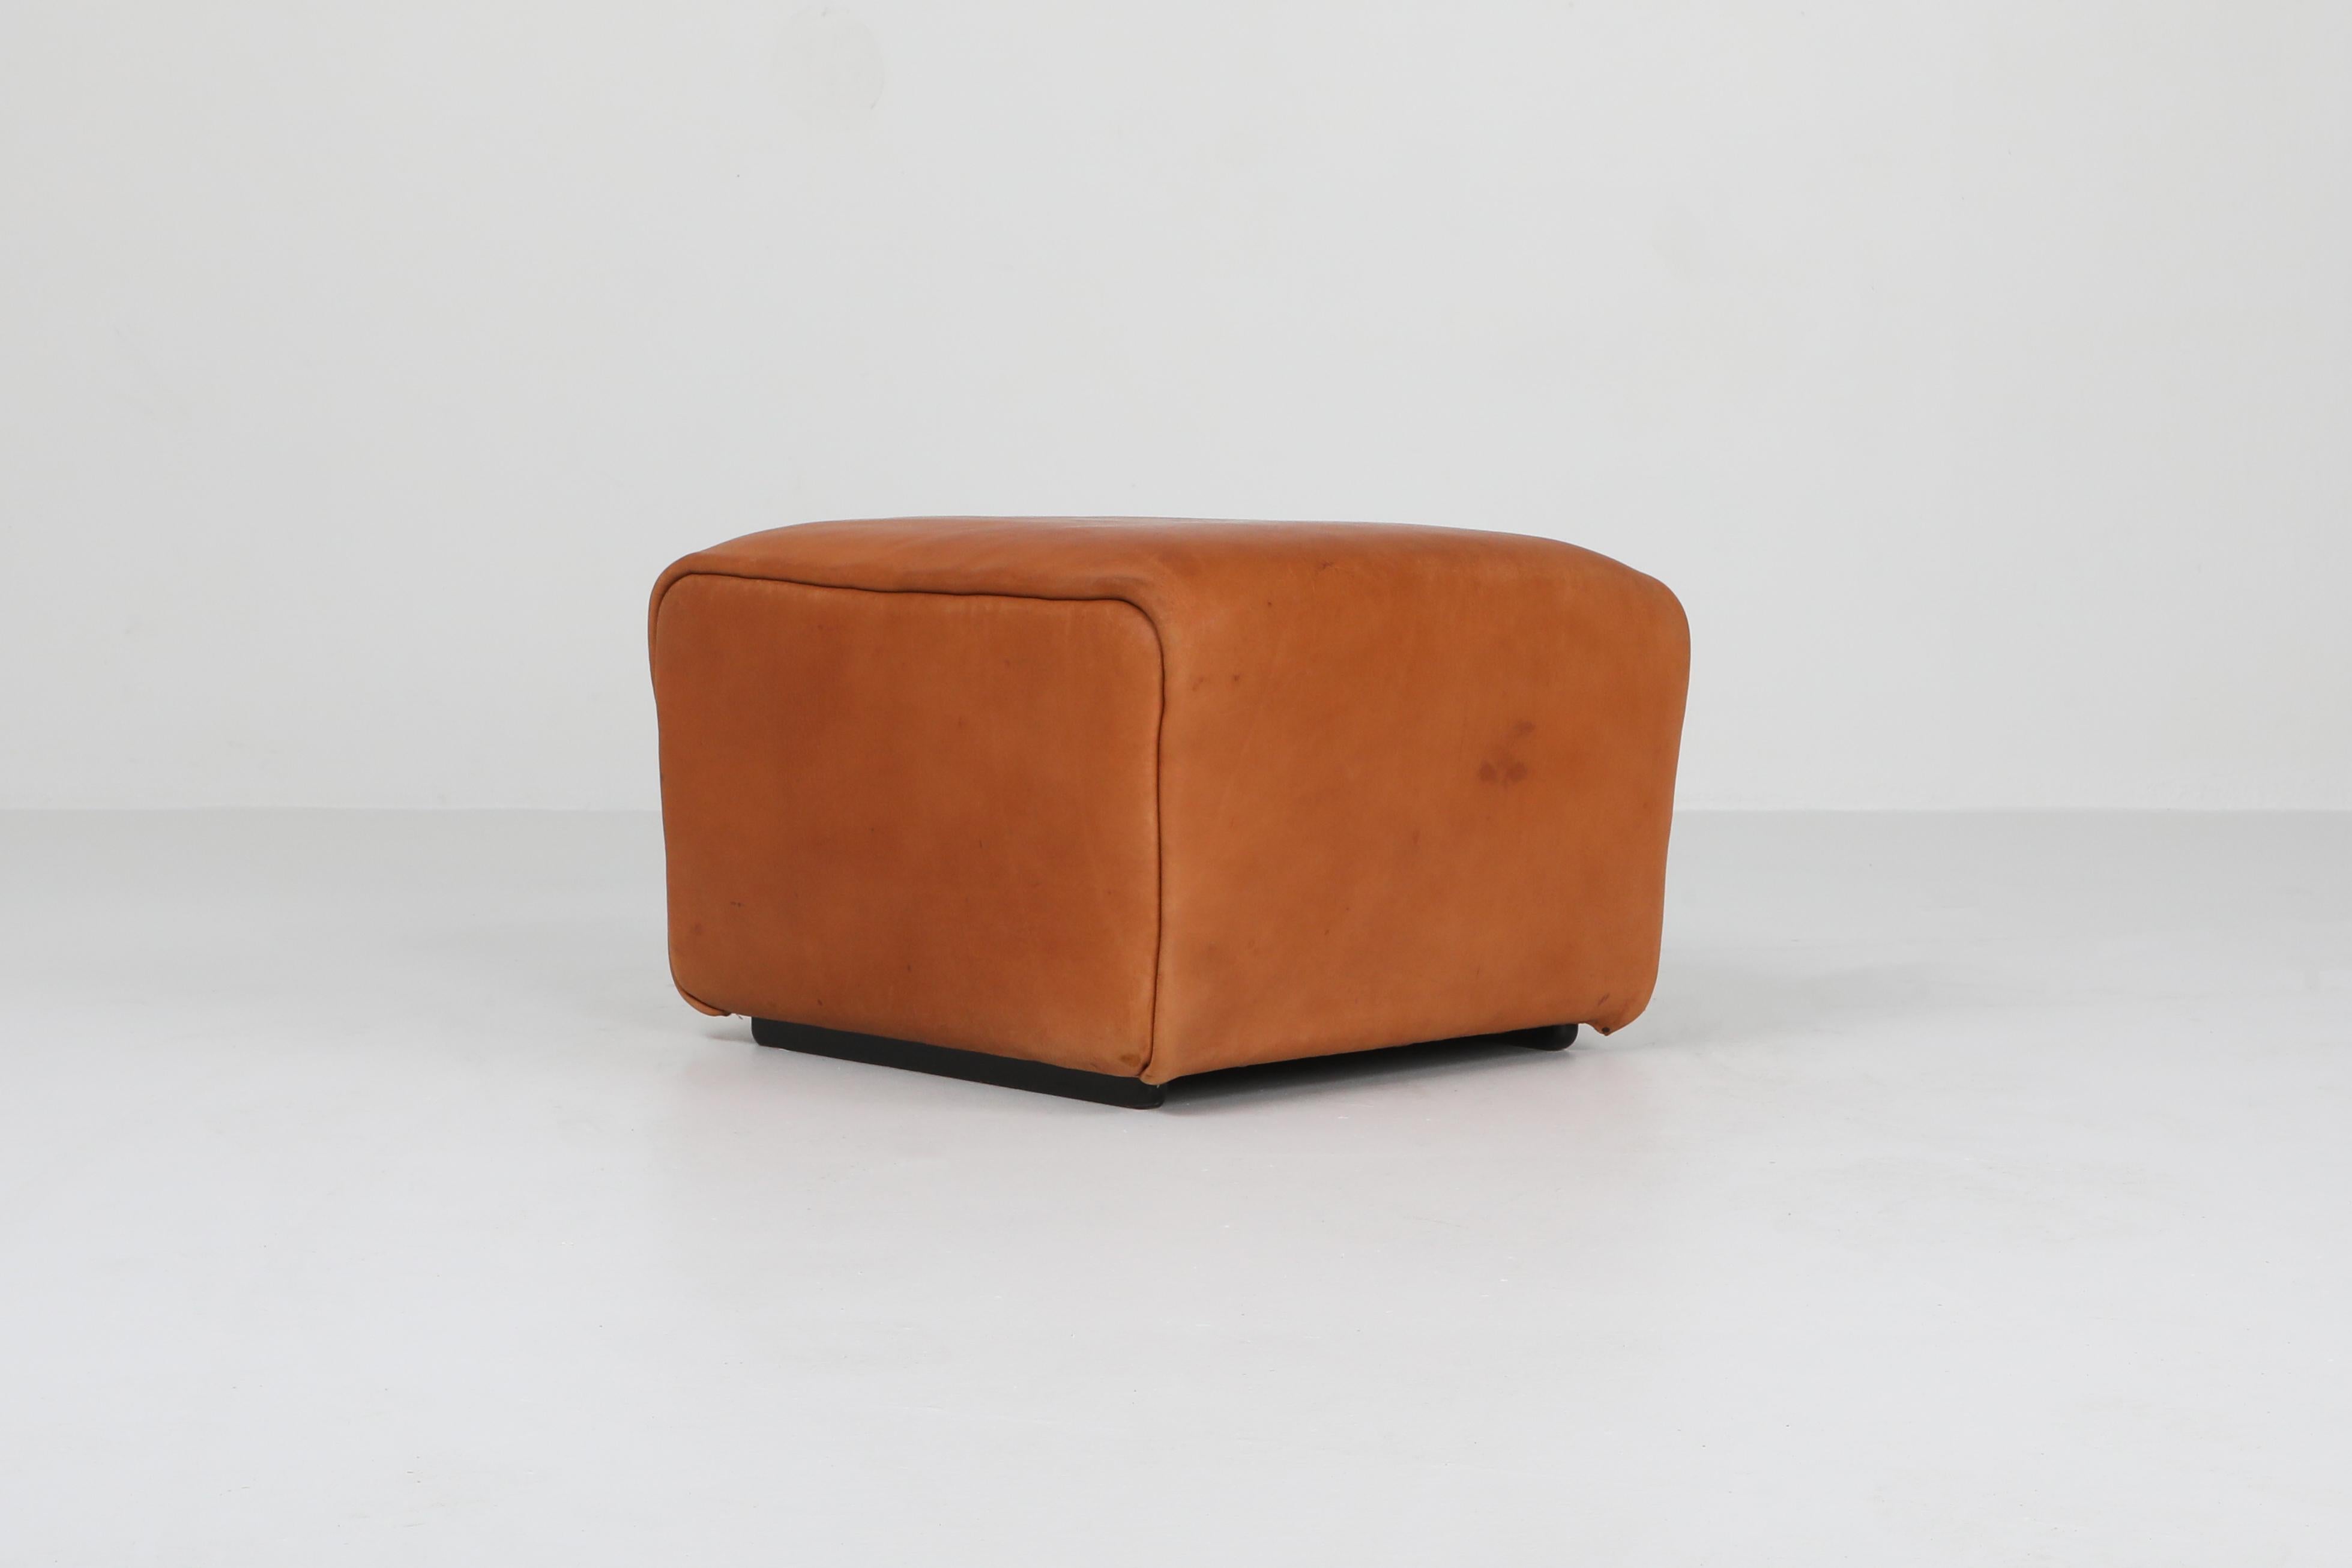 Cognac leather ottoman by Swiss manufacturer De Sede.

The DS models are true design Classics and are still in production. These are original ottomans with tons of character and a great patina you only get with age.
thick buffel hide